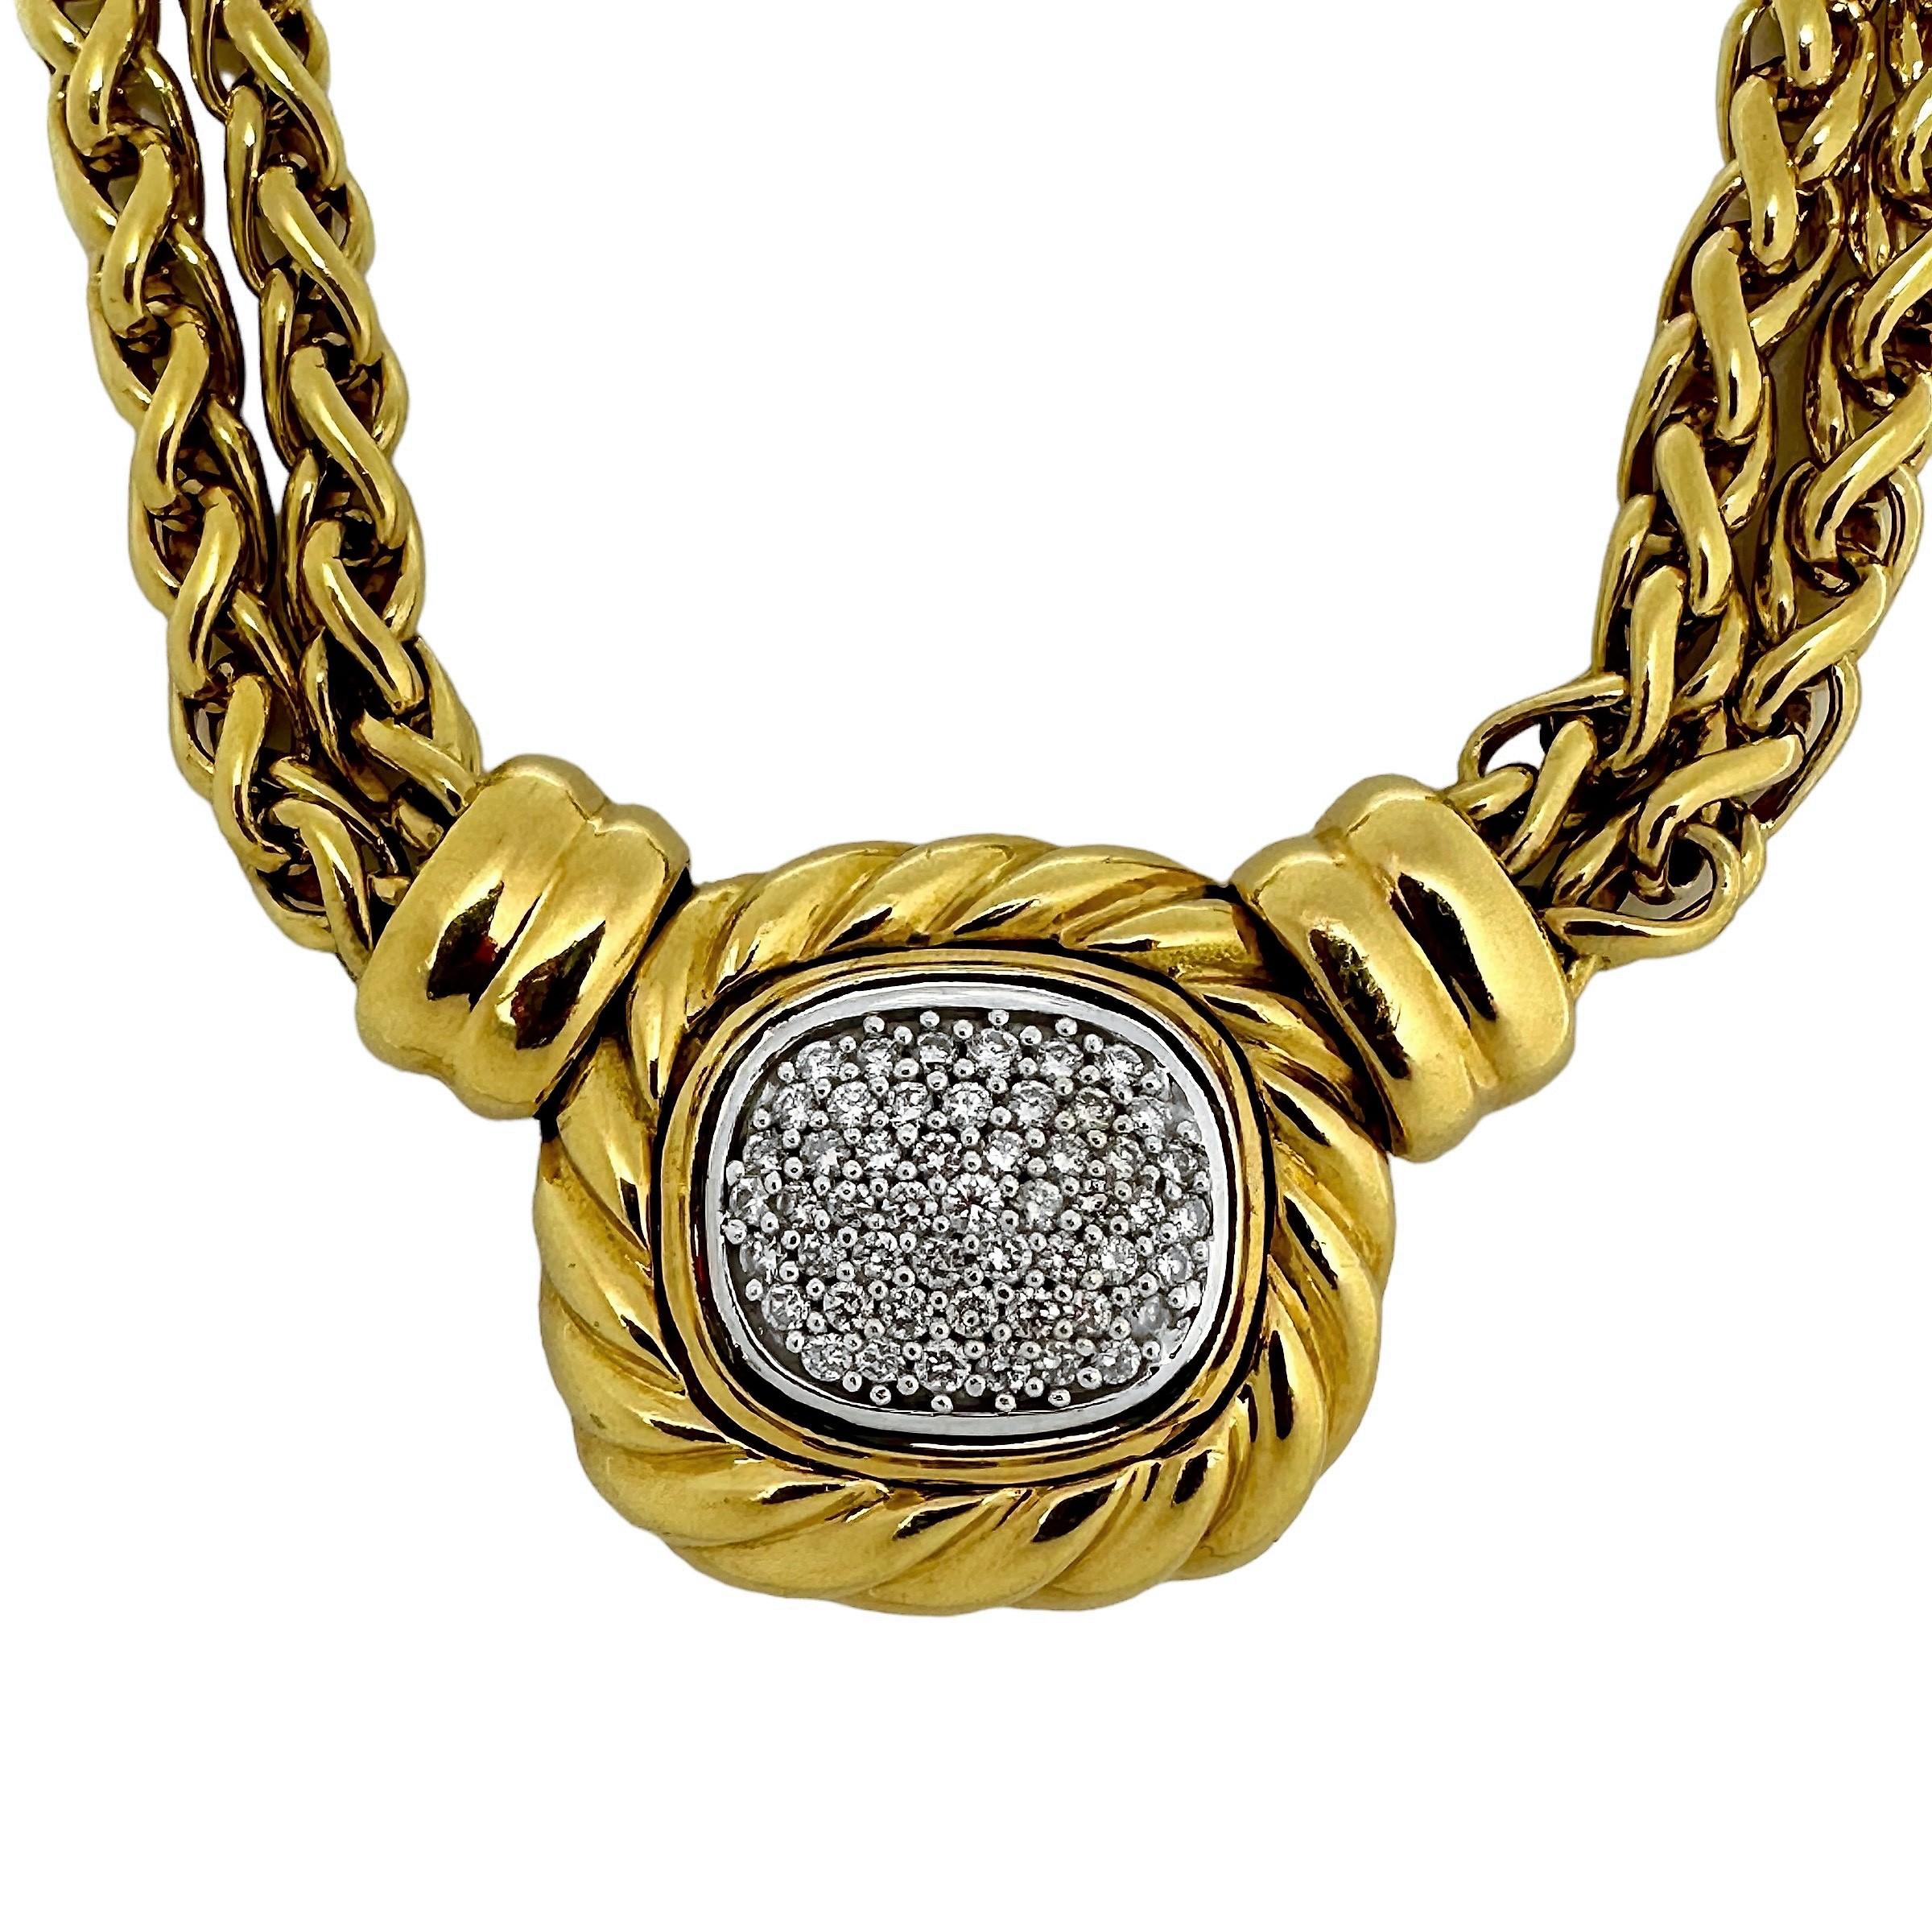 This vintage David Yurman 18K yellow gold double wheat link necklace has, as it's centerpiece, a cushion shaped, rope edge plate pave set with fifty round brilliant cut diamonds having a total approximate weight of .50ct. Overall diamond quality is